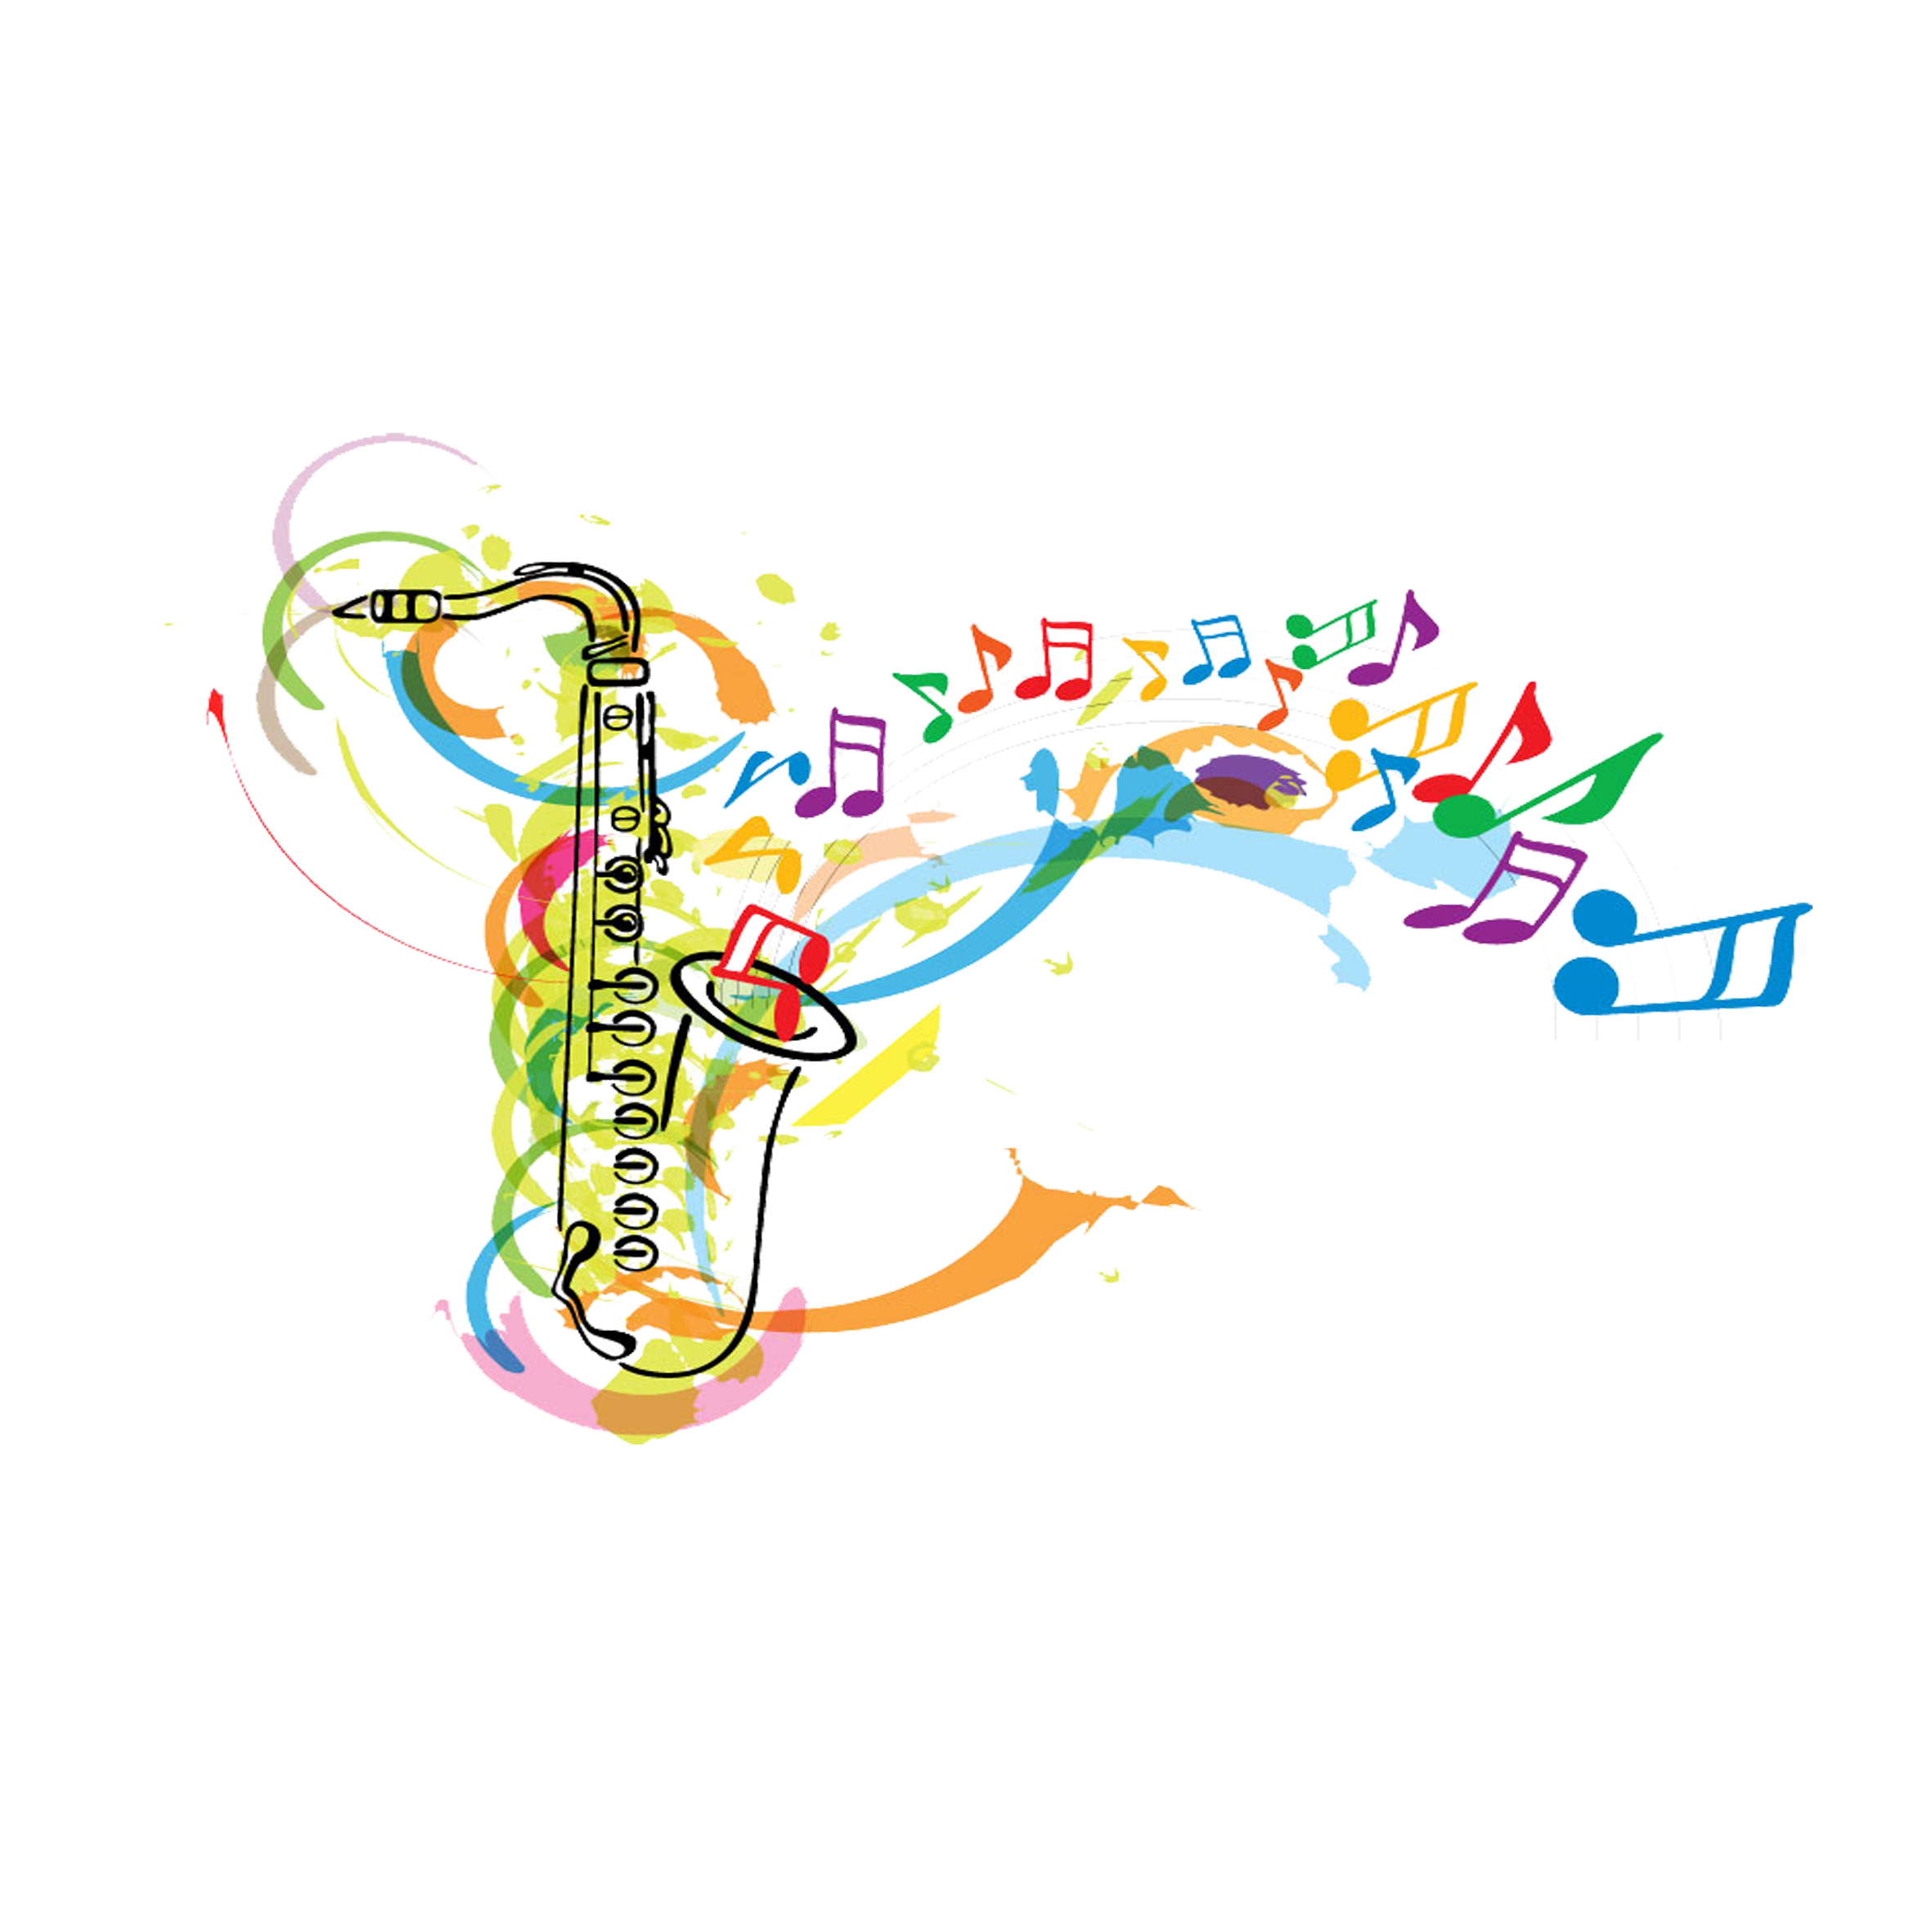 Musical clipart music festival. Saxophone royalty free color